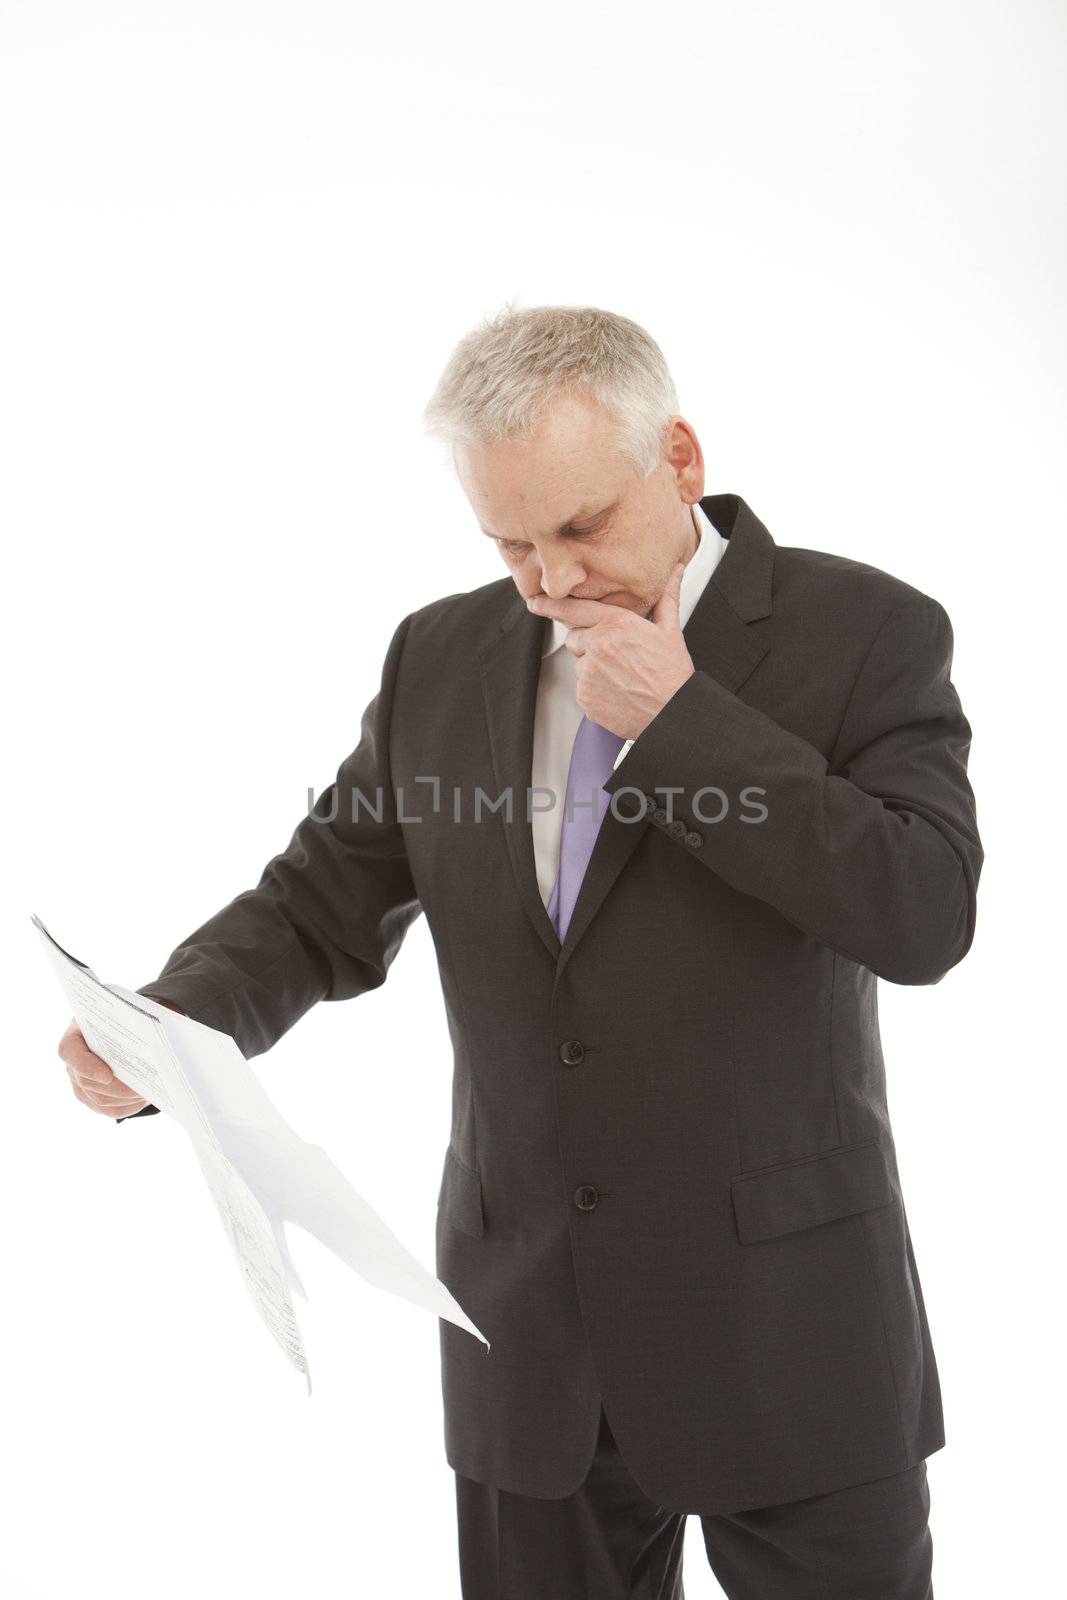 Businessman standing with his hand to his chin checking documents held in his hand